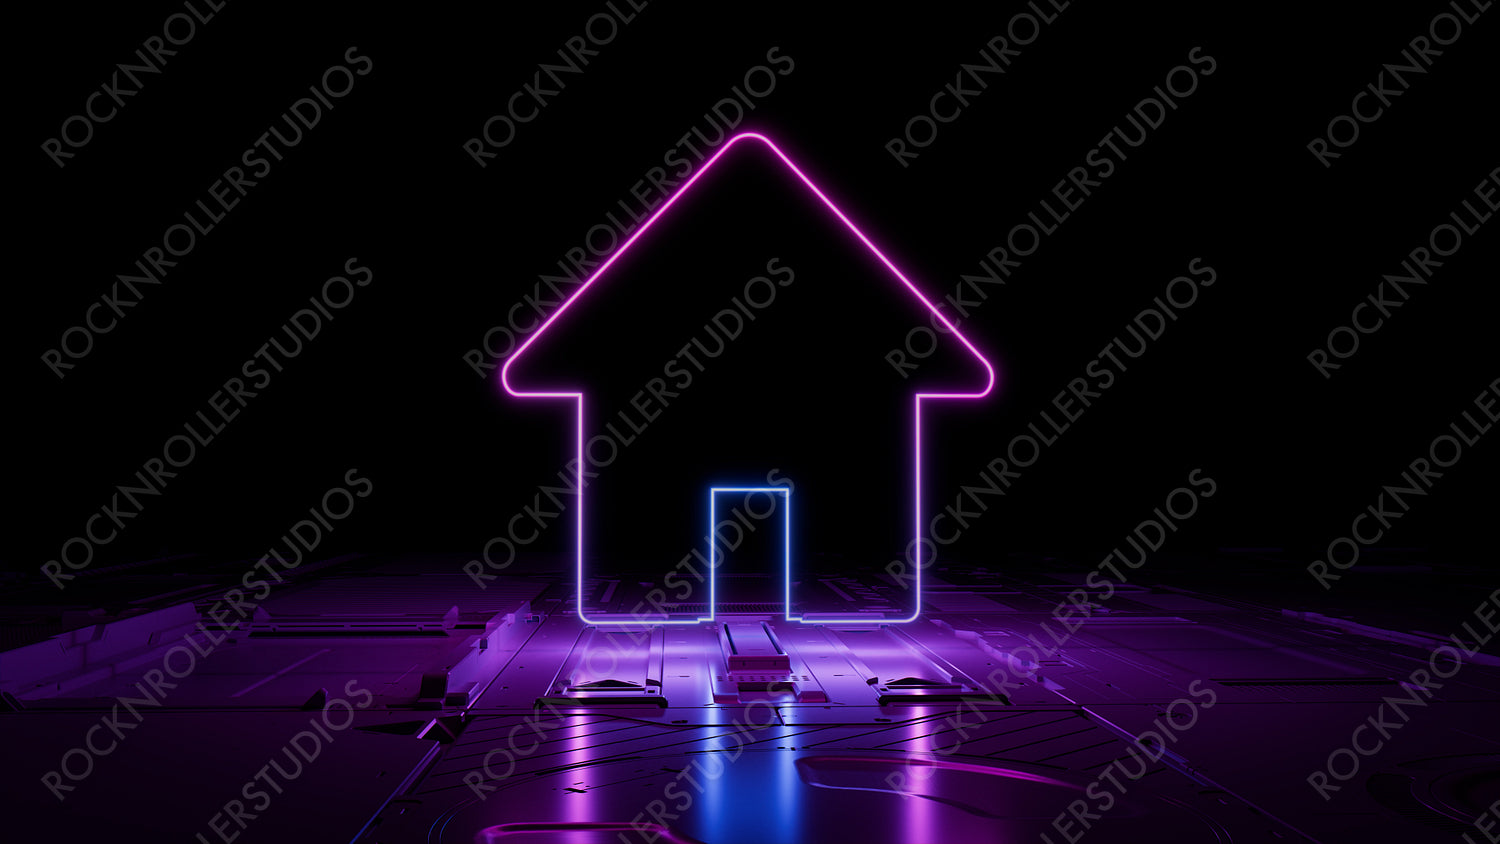 Pink and Blue Internet Technology Concept with home symbol as a neon light. Vibrant colored icon, on a black background with high tech floor. 3D Render